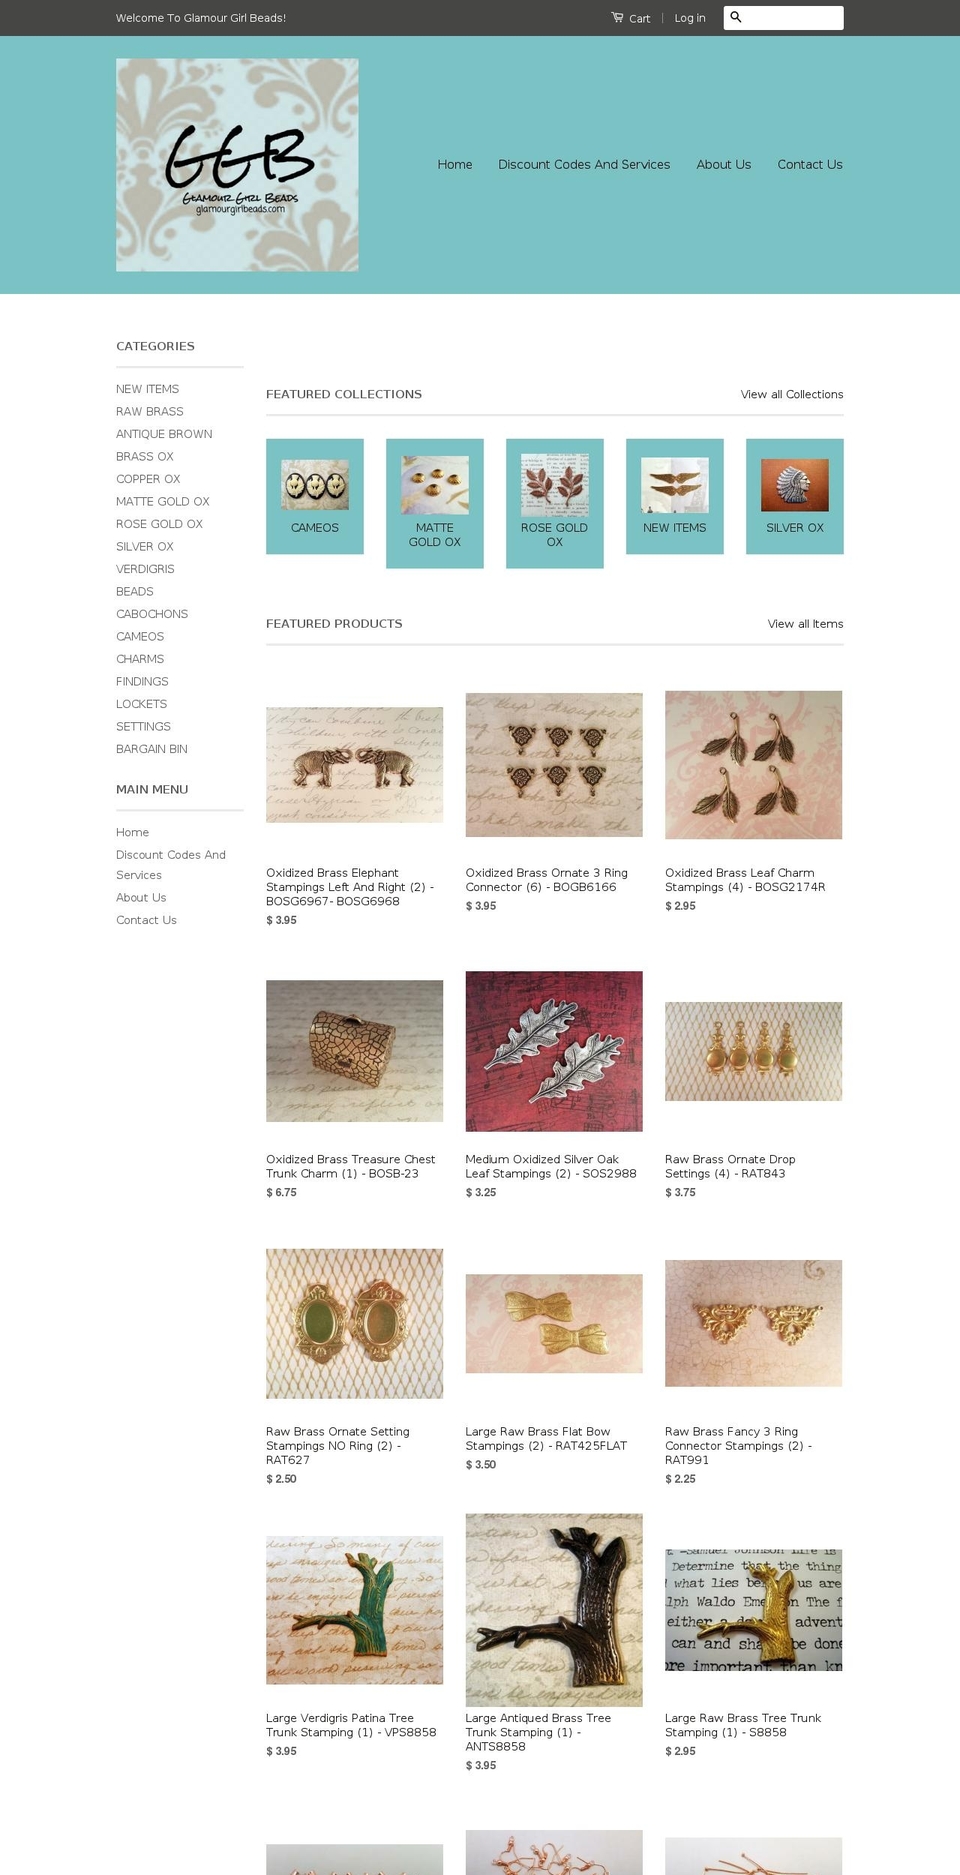 classic Shopify theme site example glamourgirlbeads.com